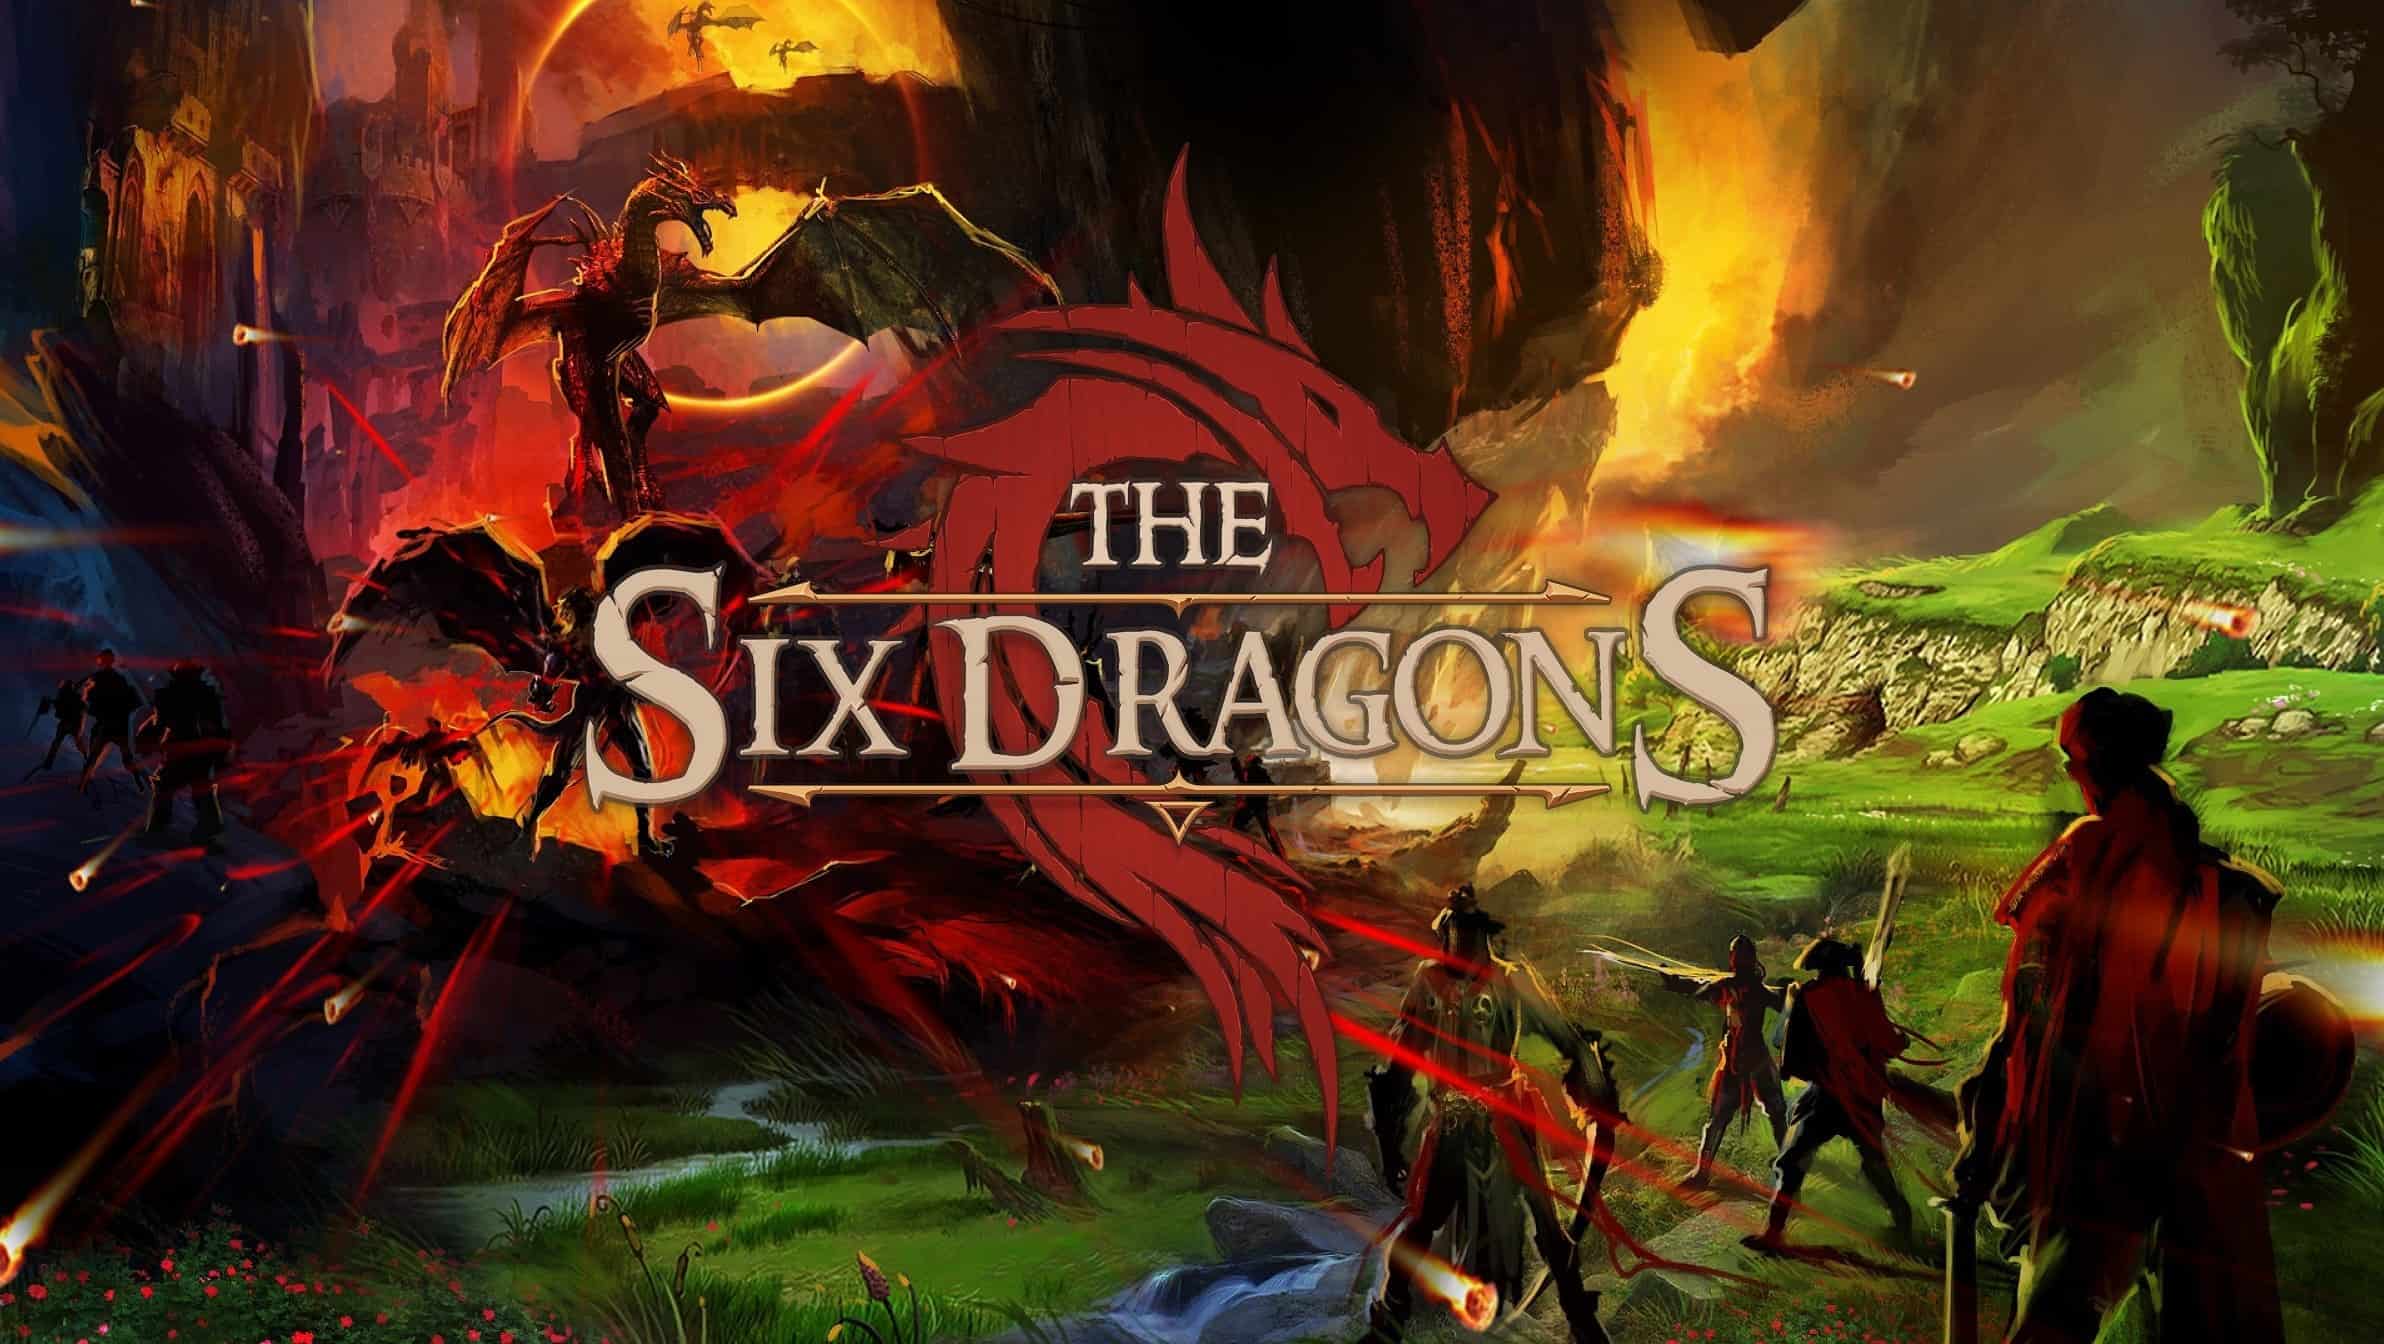 SixDragons Enjin Multiverse Blockchain Crypto Games Six Dragons is an upcoming Open World RPGblockchain game and officially a member of the Enjin's multiverse ecosystem. Being developed using the blockchain SDK by Enjin Coin the game will feature epic battles between players and monsters in an open world map, a crafting system and hundreds of items as well as Hero classes.